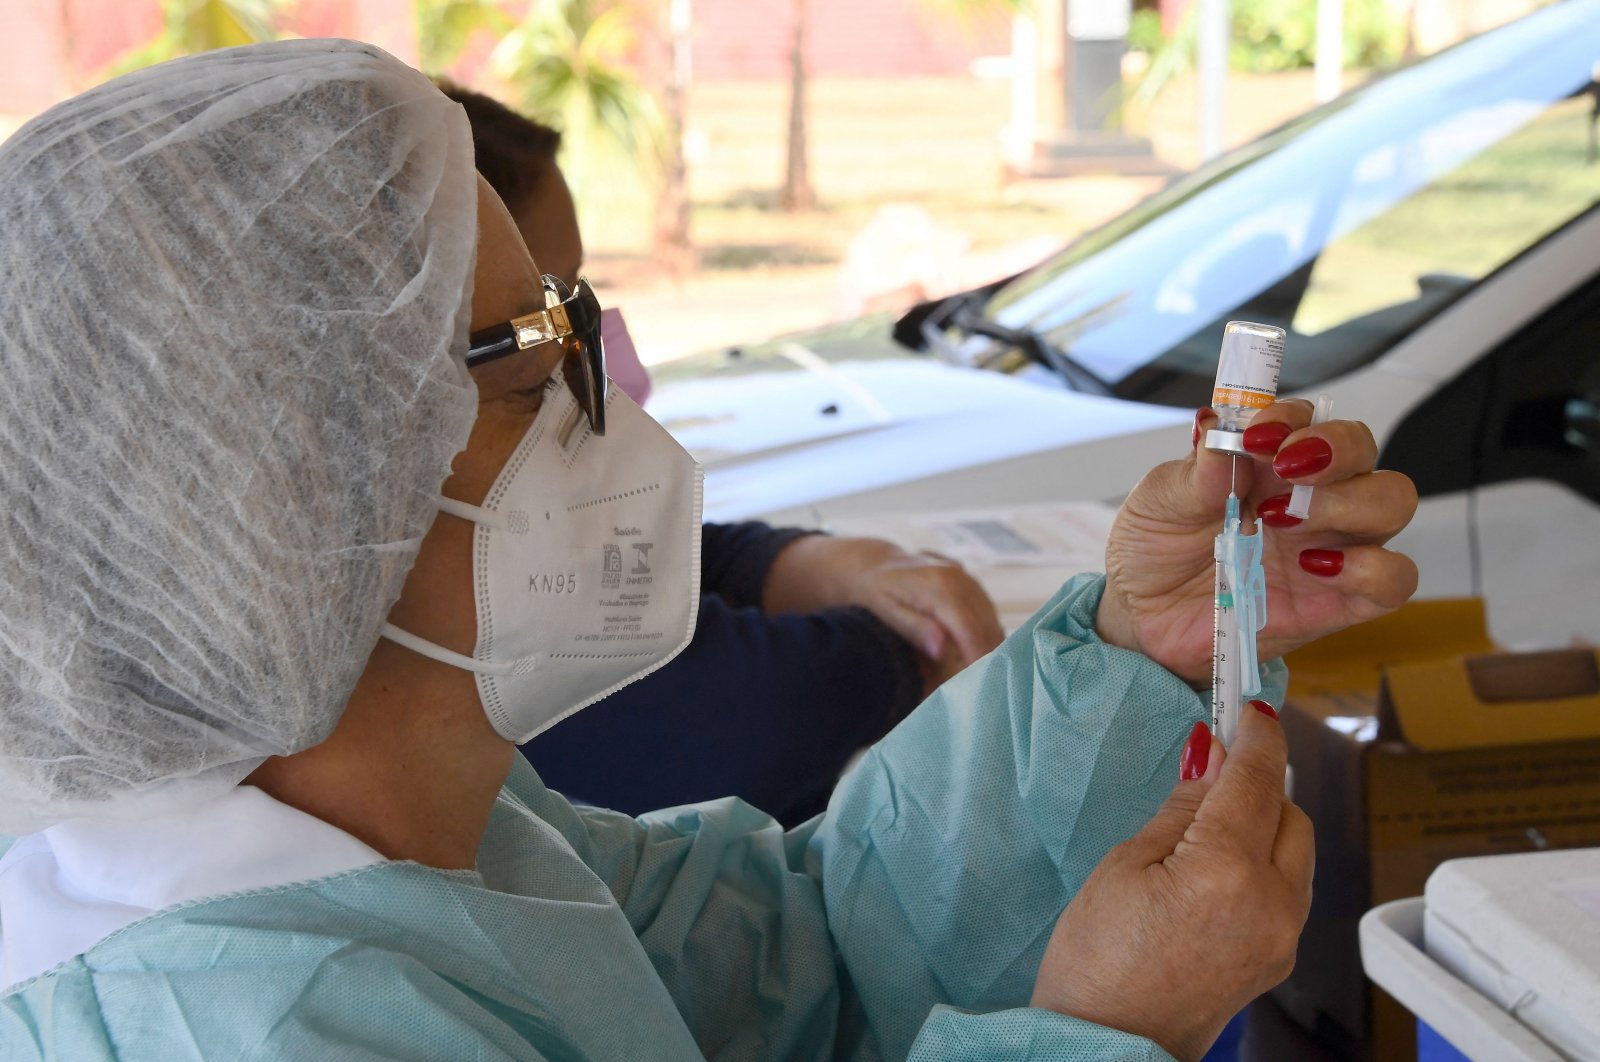 A healthcare worker prepares a dose of the COVID-19 vaccine at a drive-thru vaccination post in Brasilia on Sep. 13, 2021. (AFP Photo)